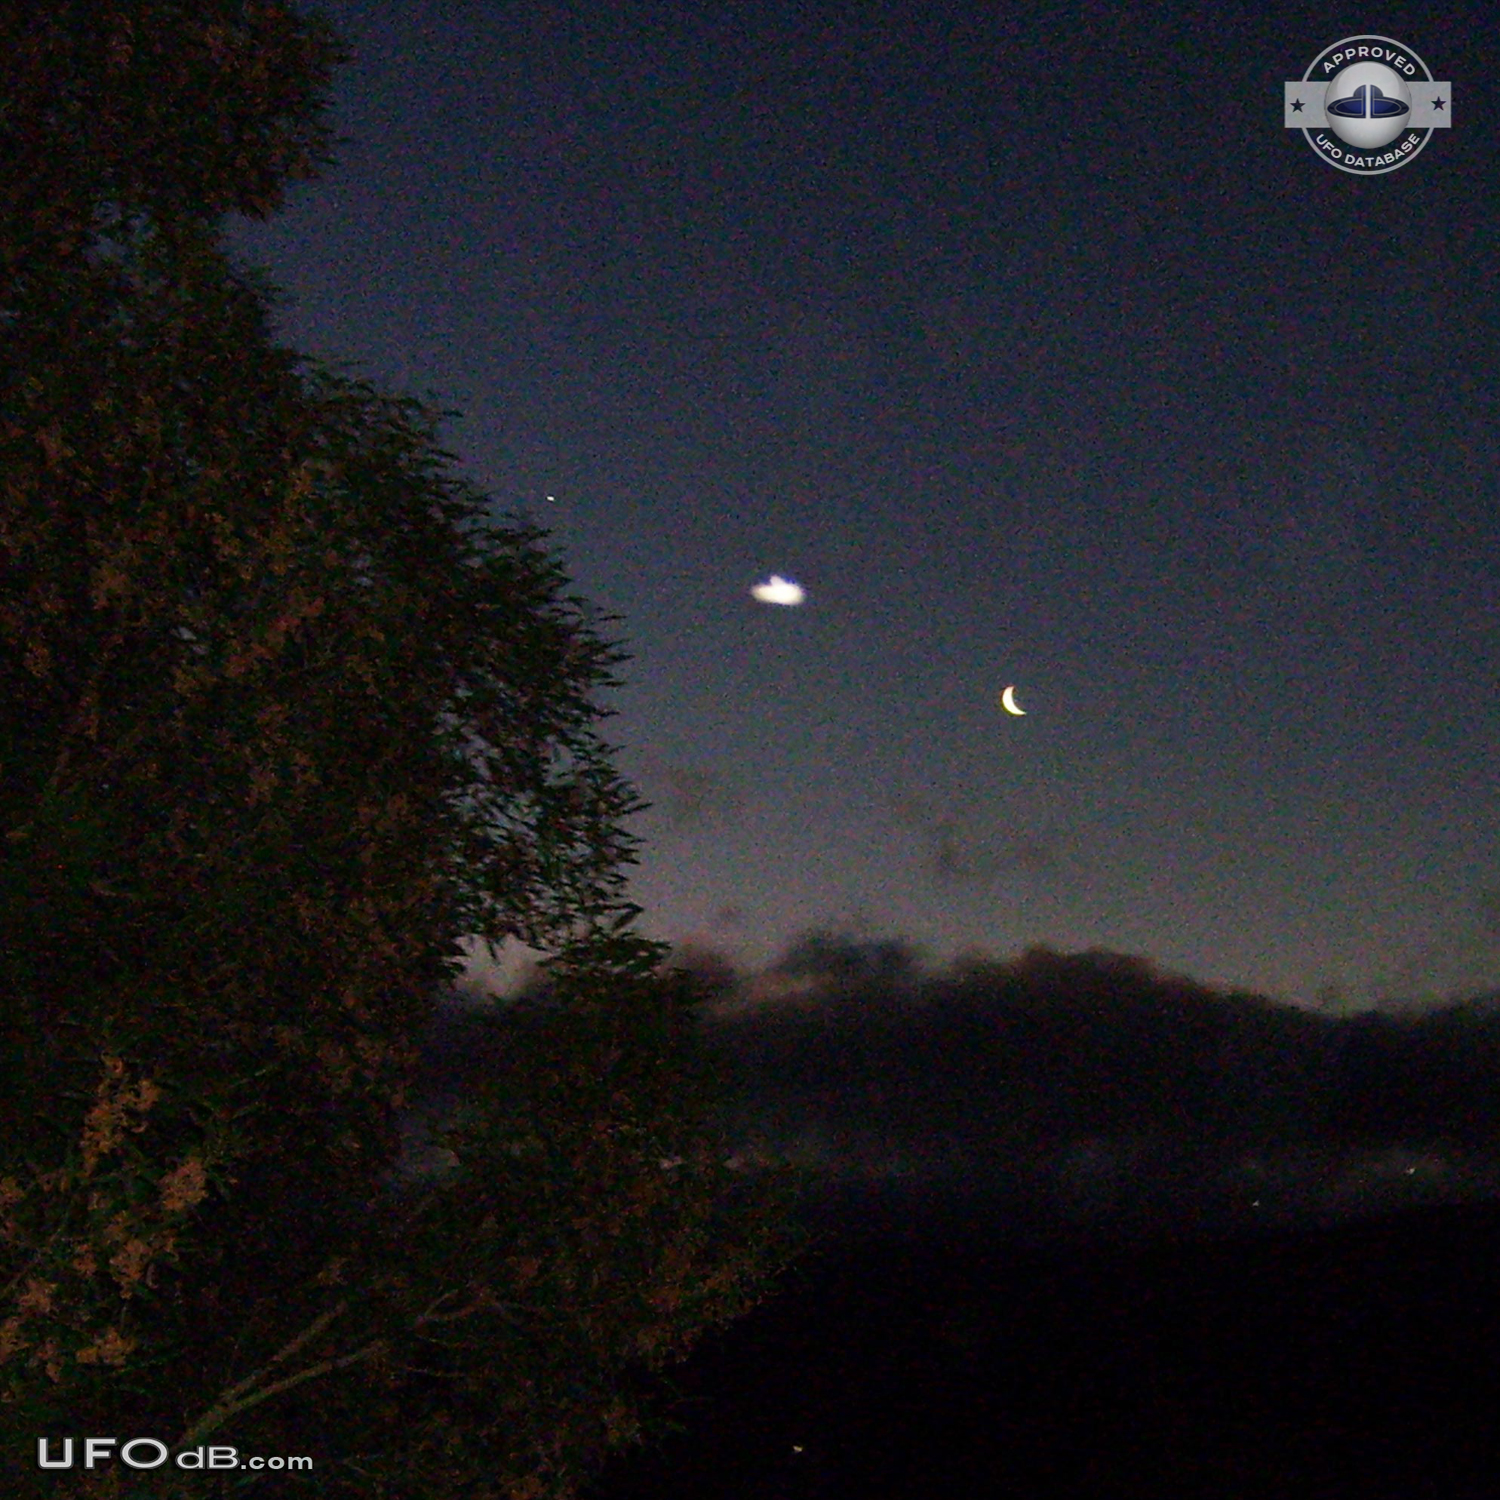 White Saucer ufo caught on picture at night over Curico, Chile - 2012 UFO Picture #406-1